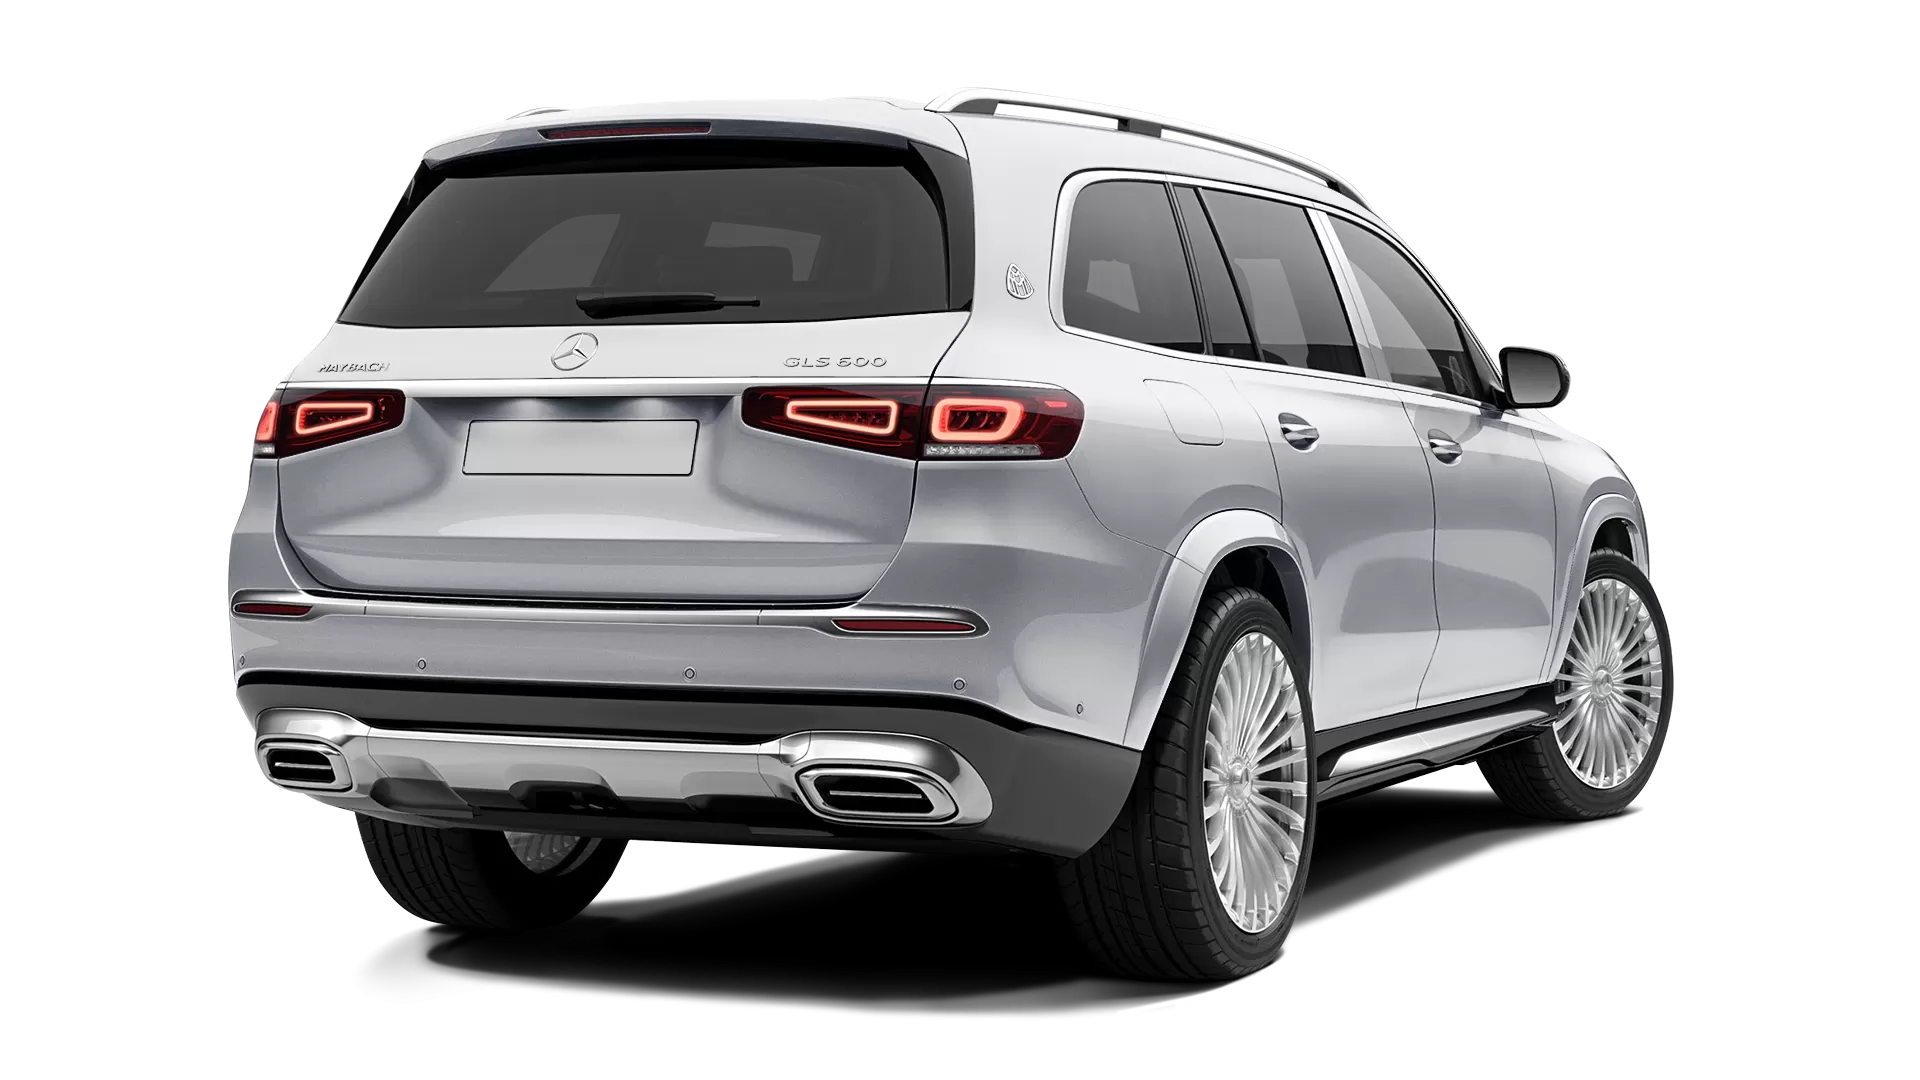 Mercedes Maybach GLS 600 stock rear view in High Tech Silver color